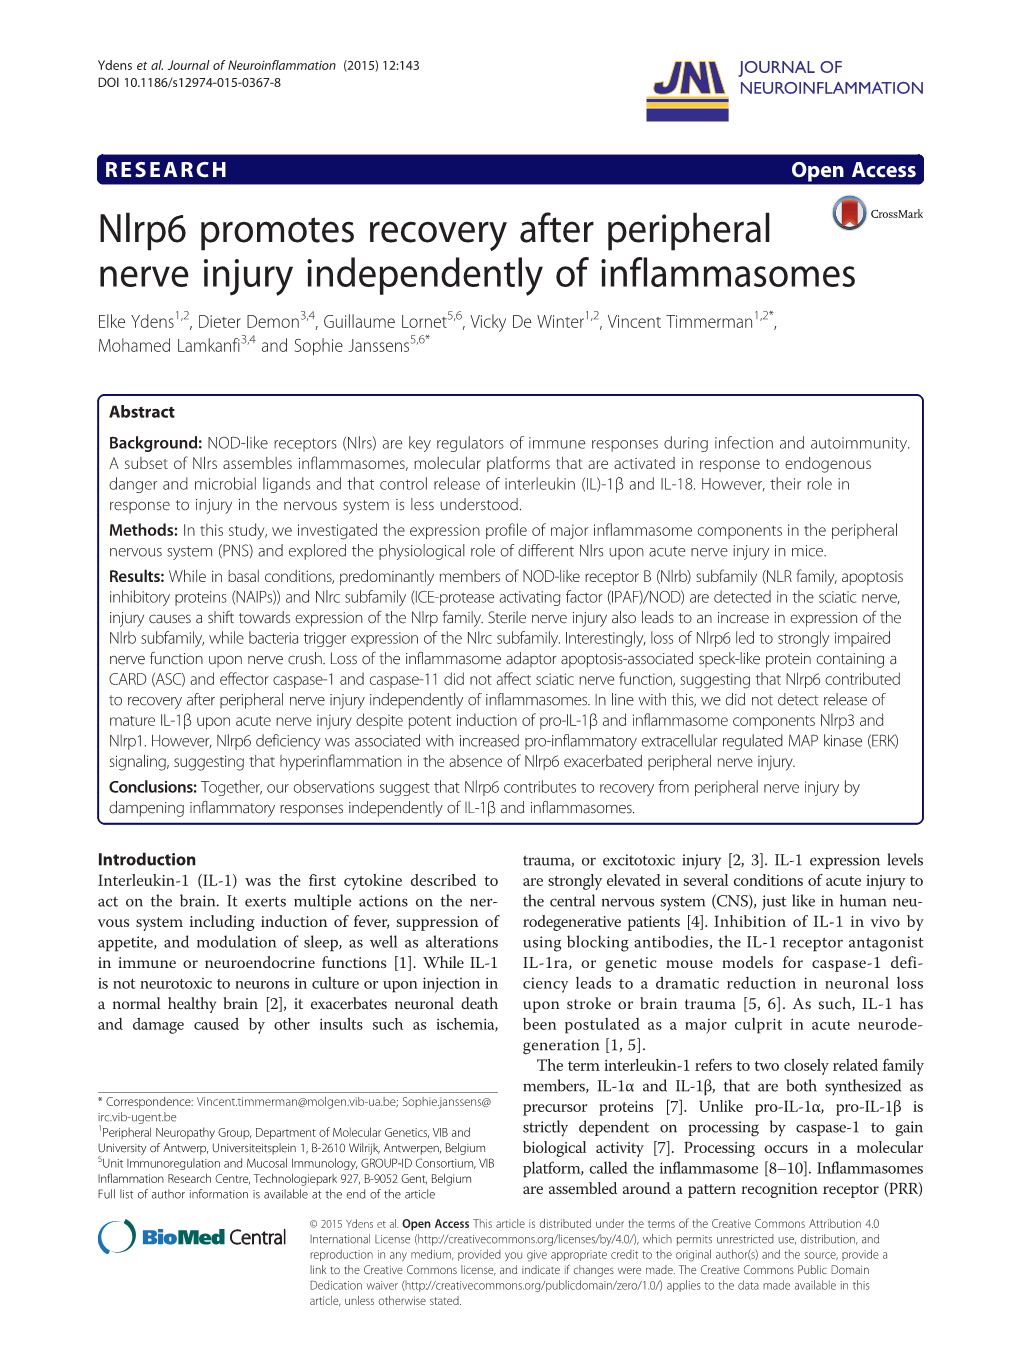 Nlrp6 Promotes Recovery After Peripheral Nerve Injury